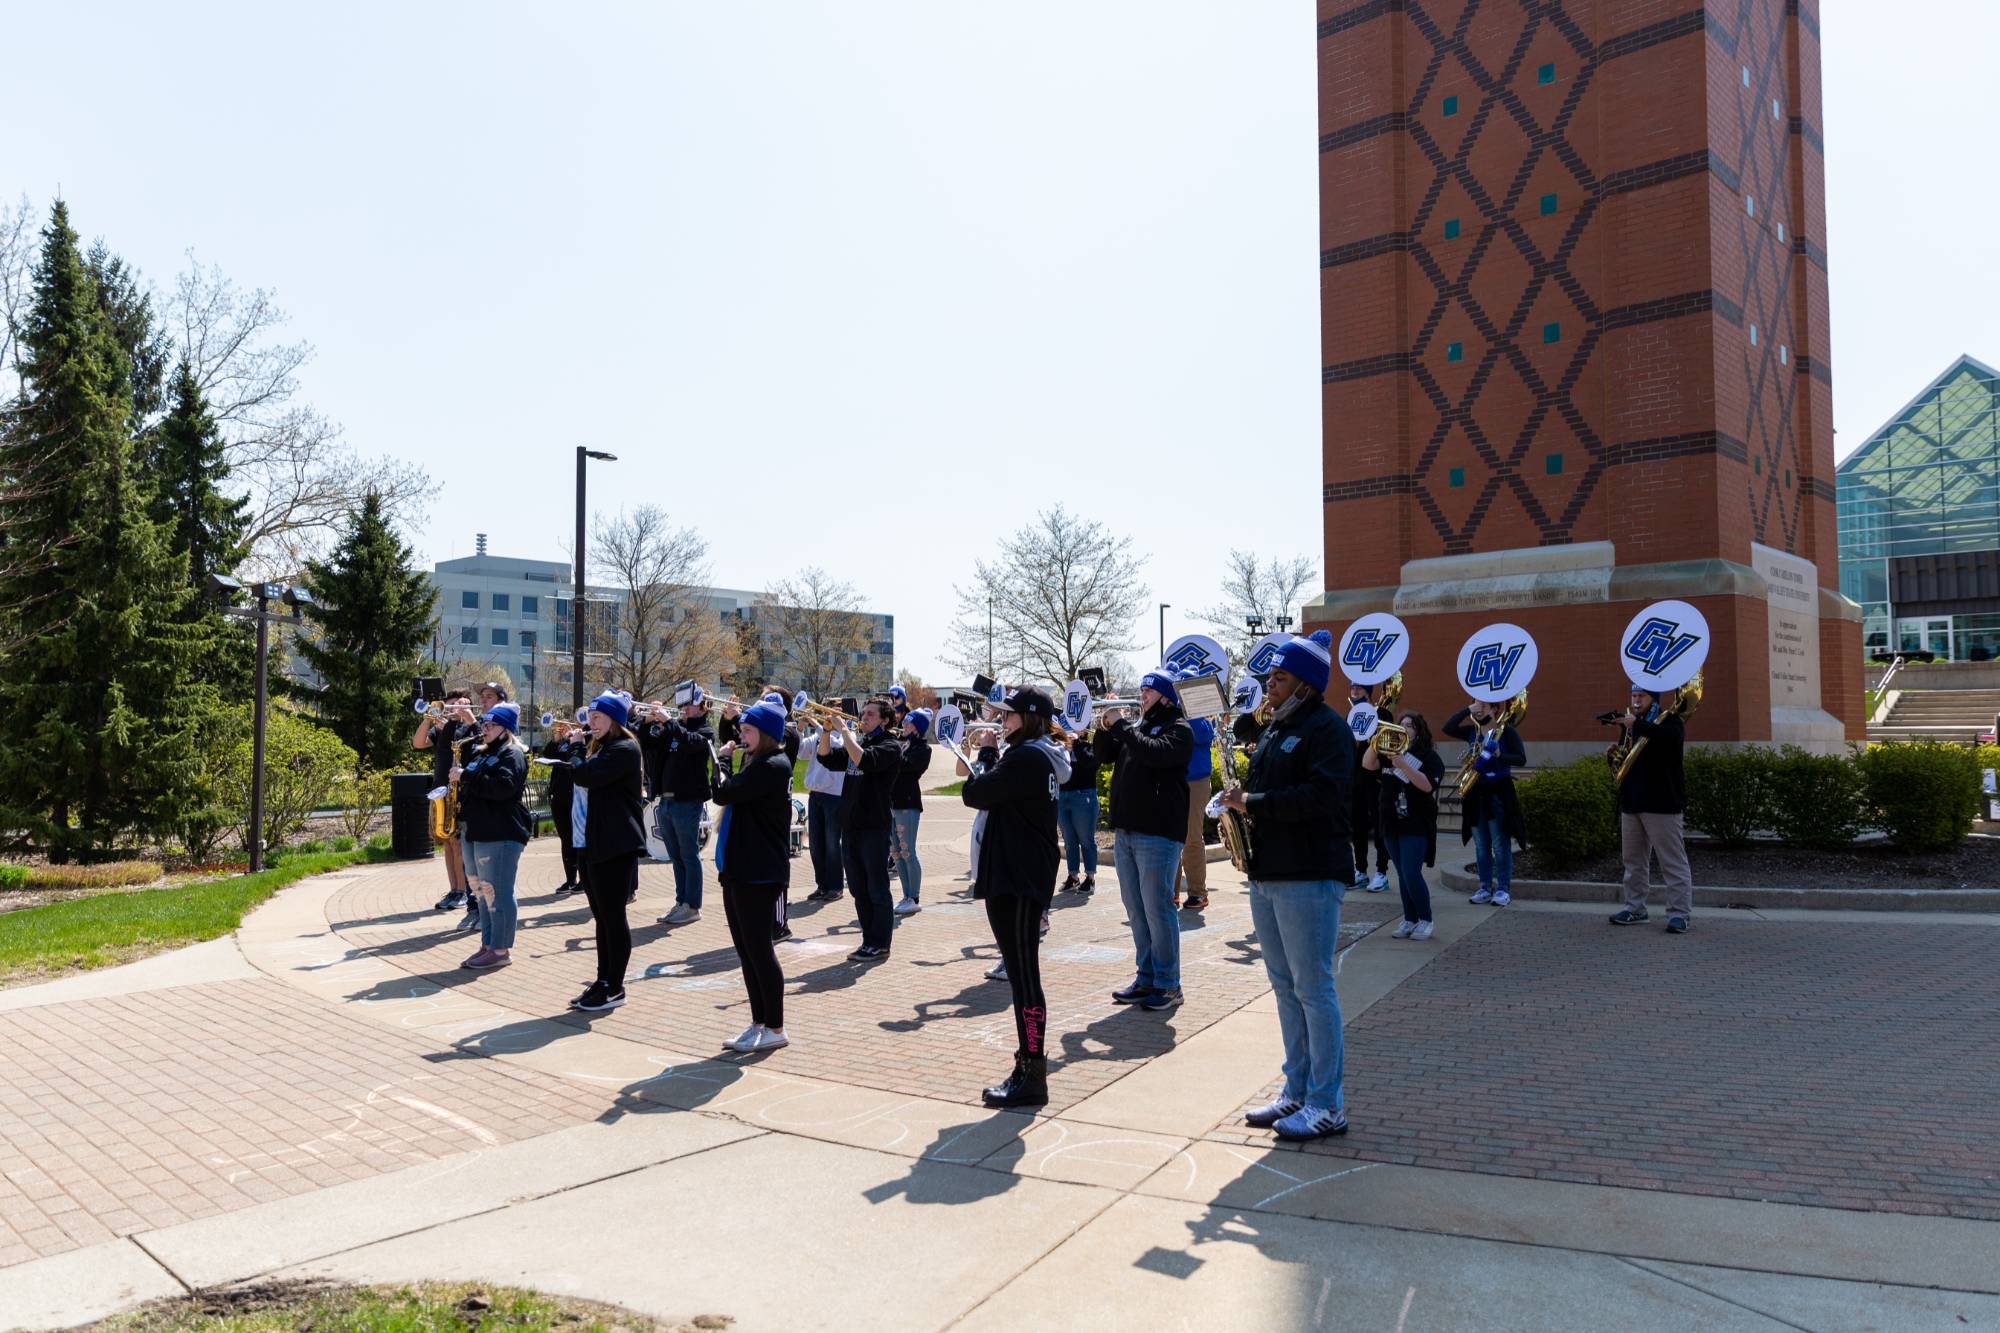 GVSU Marching Band members standing in front of the clock tower playing instruments